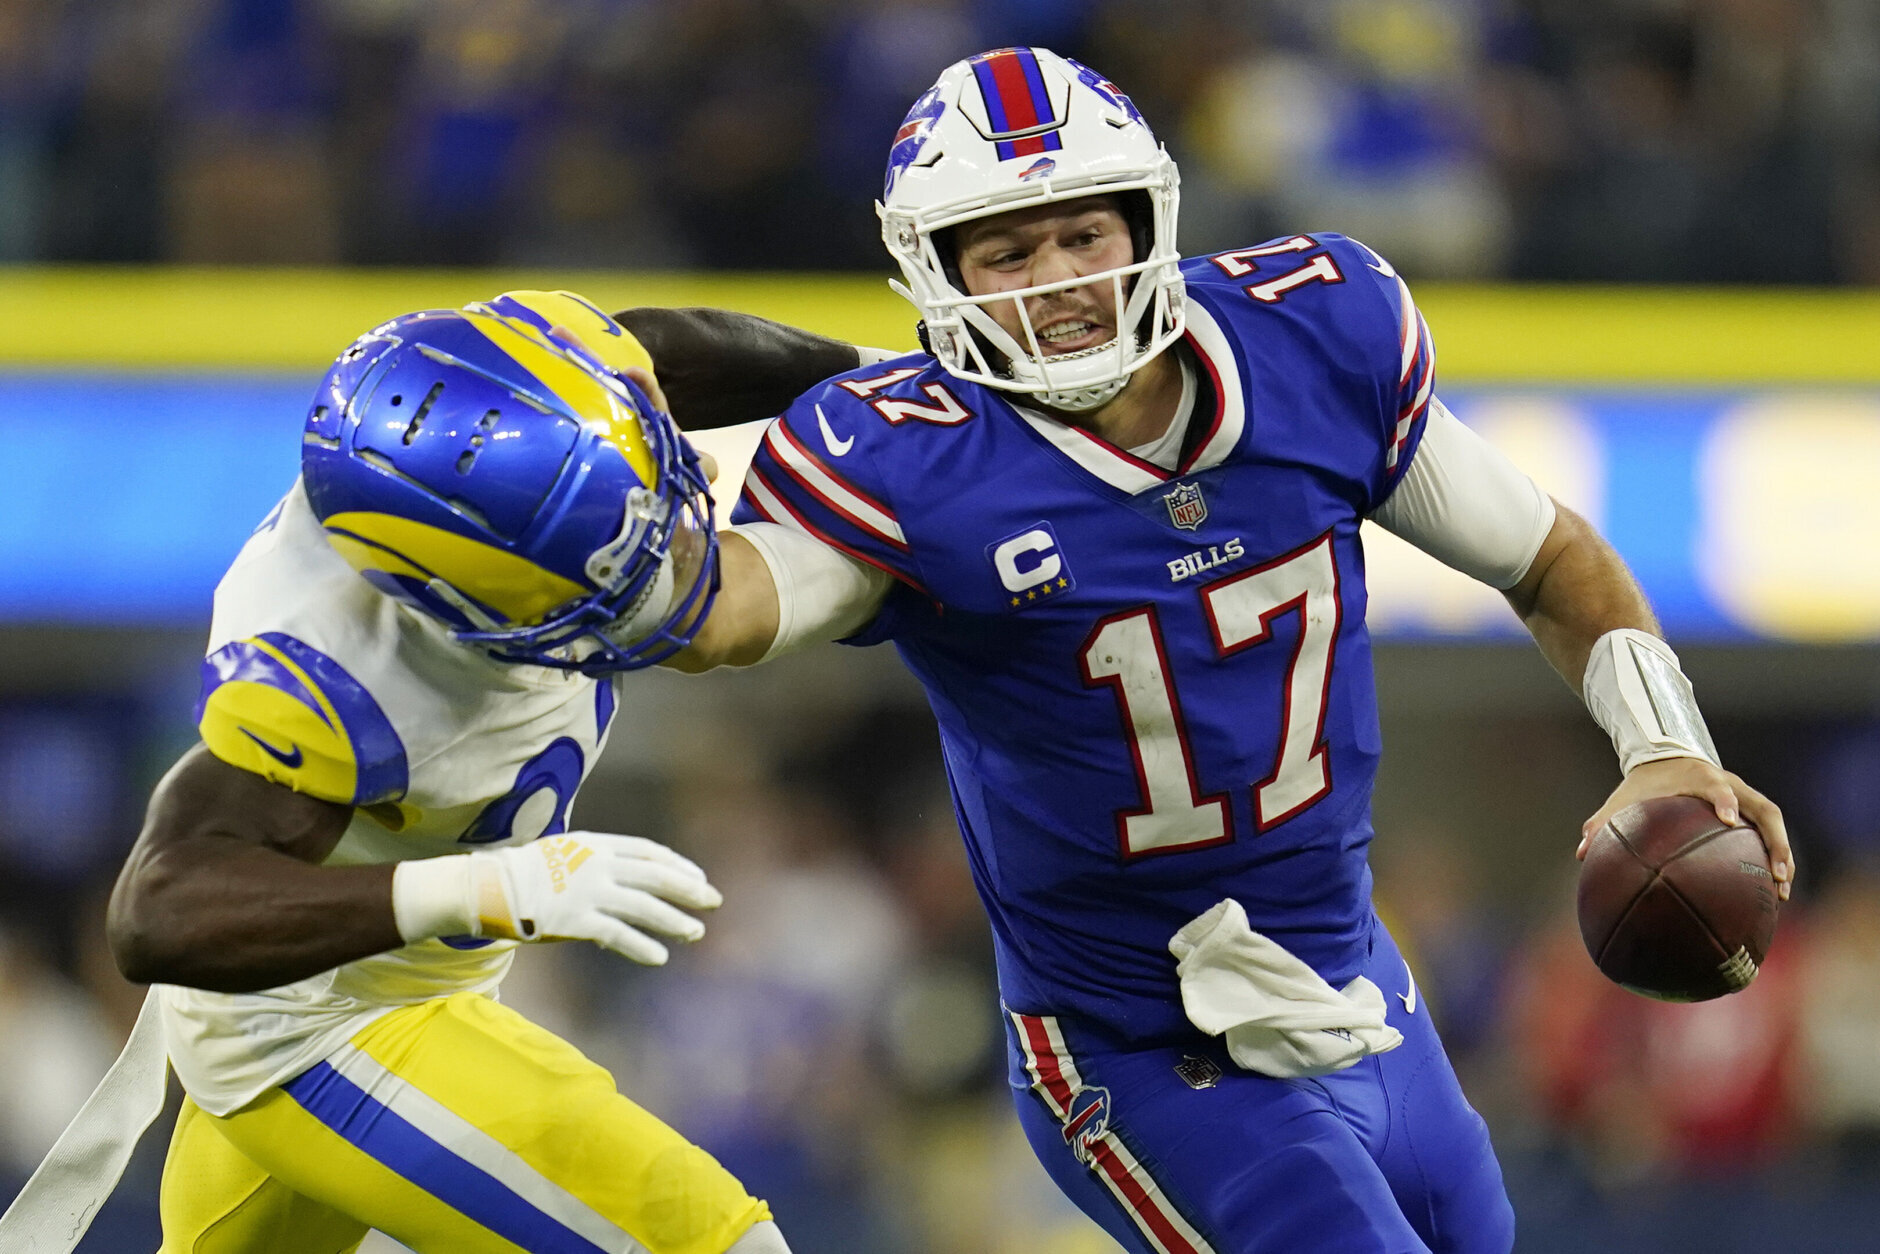 <p><em><strong>Bills 31</strong></em><br />
<em><strong>Rams 10</strong></em></p>
<p><a href="https://profootballtalk.nbcsports.com/2022/09/08/sports-betting-may-have-contributed-to-big-expectations-for-bills/" target="_blank" rel="noopener">For whatever reason Buffalo is the Super Bowl front-runner</a>, it’s impressive that this was the fourth time in the last six Bills games that their punter had the night off. <a href="https://www.si.com/extra-mustard/2022/09/09/jalen-ramsey-josh-allen-trash-comments-gq-rams-bills-blowout" target="_blank" rel="noopener">Josh Allen has been clowning Jalen Ramsey for years</a>, but Thursday night&#8217;s rebuttal happened to be the second-biggest beatdown of a defending champion in their opener. <a href="https://www.youtube.com/watch?v=dfuVdja6lDU" target="_blank" rel="noopener">Take that for data</a>.</p>
